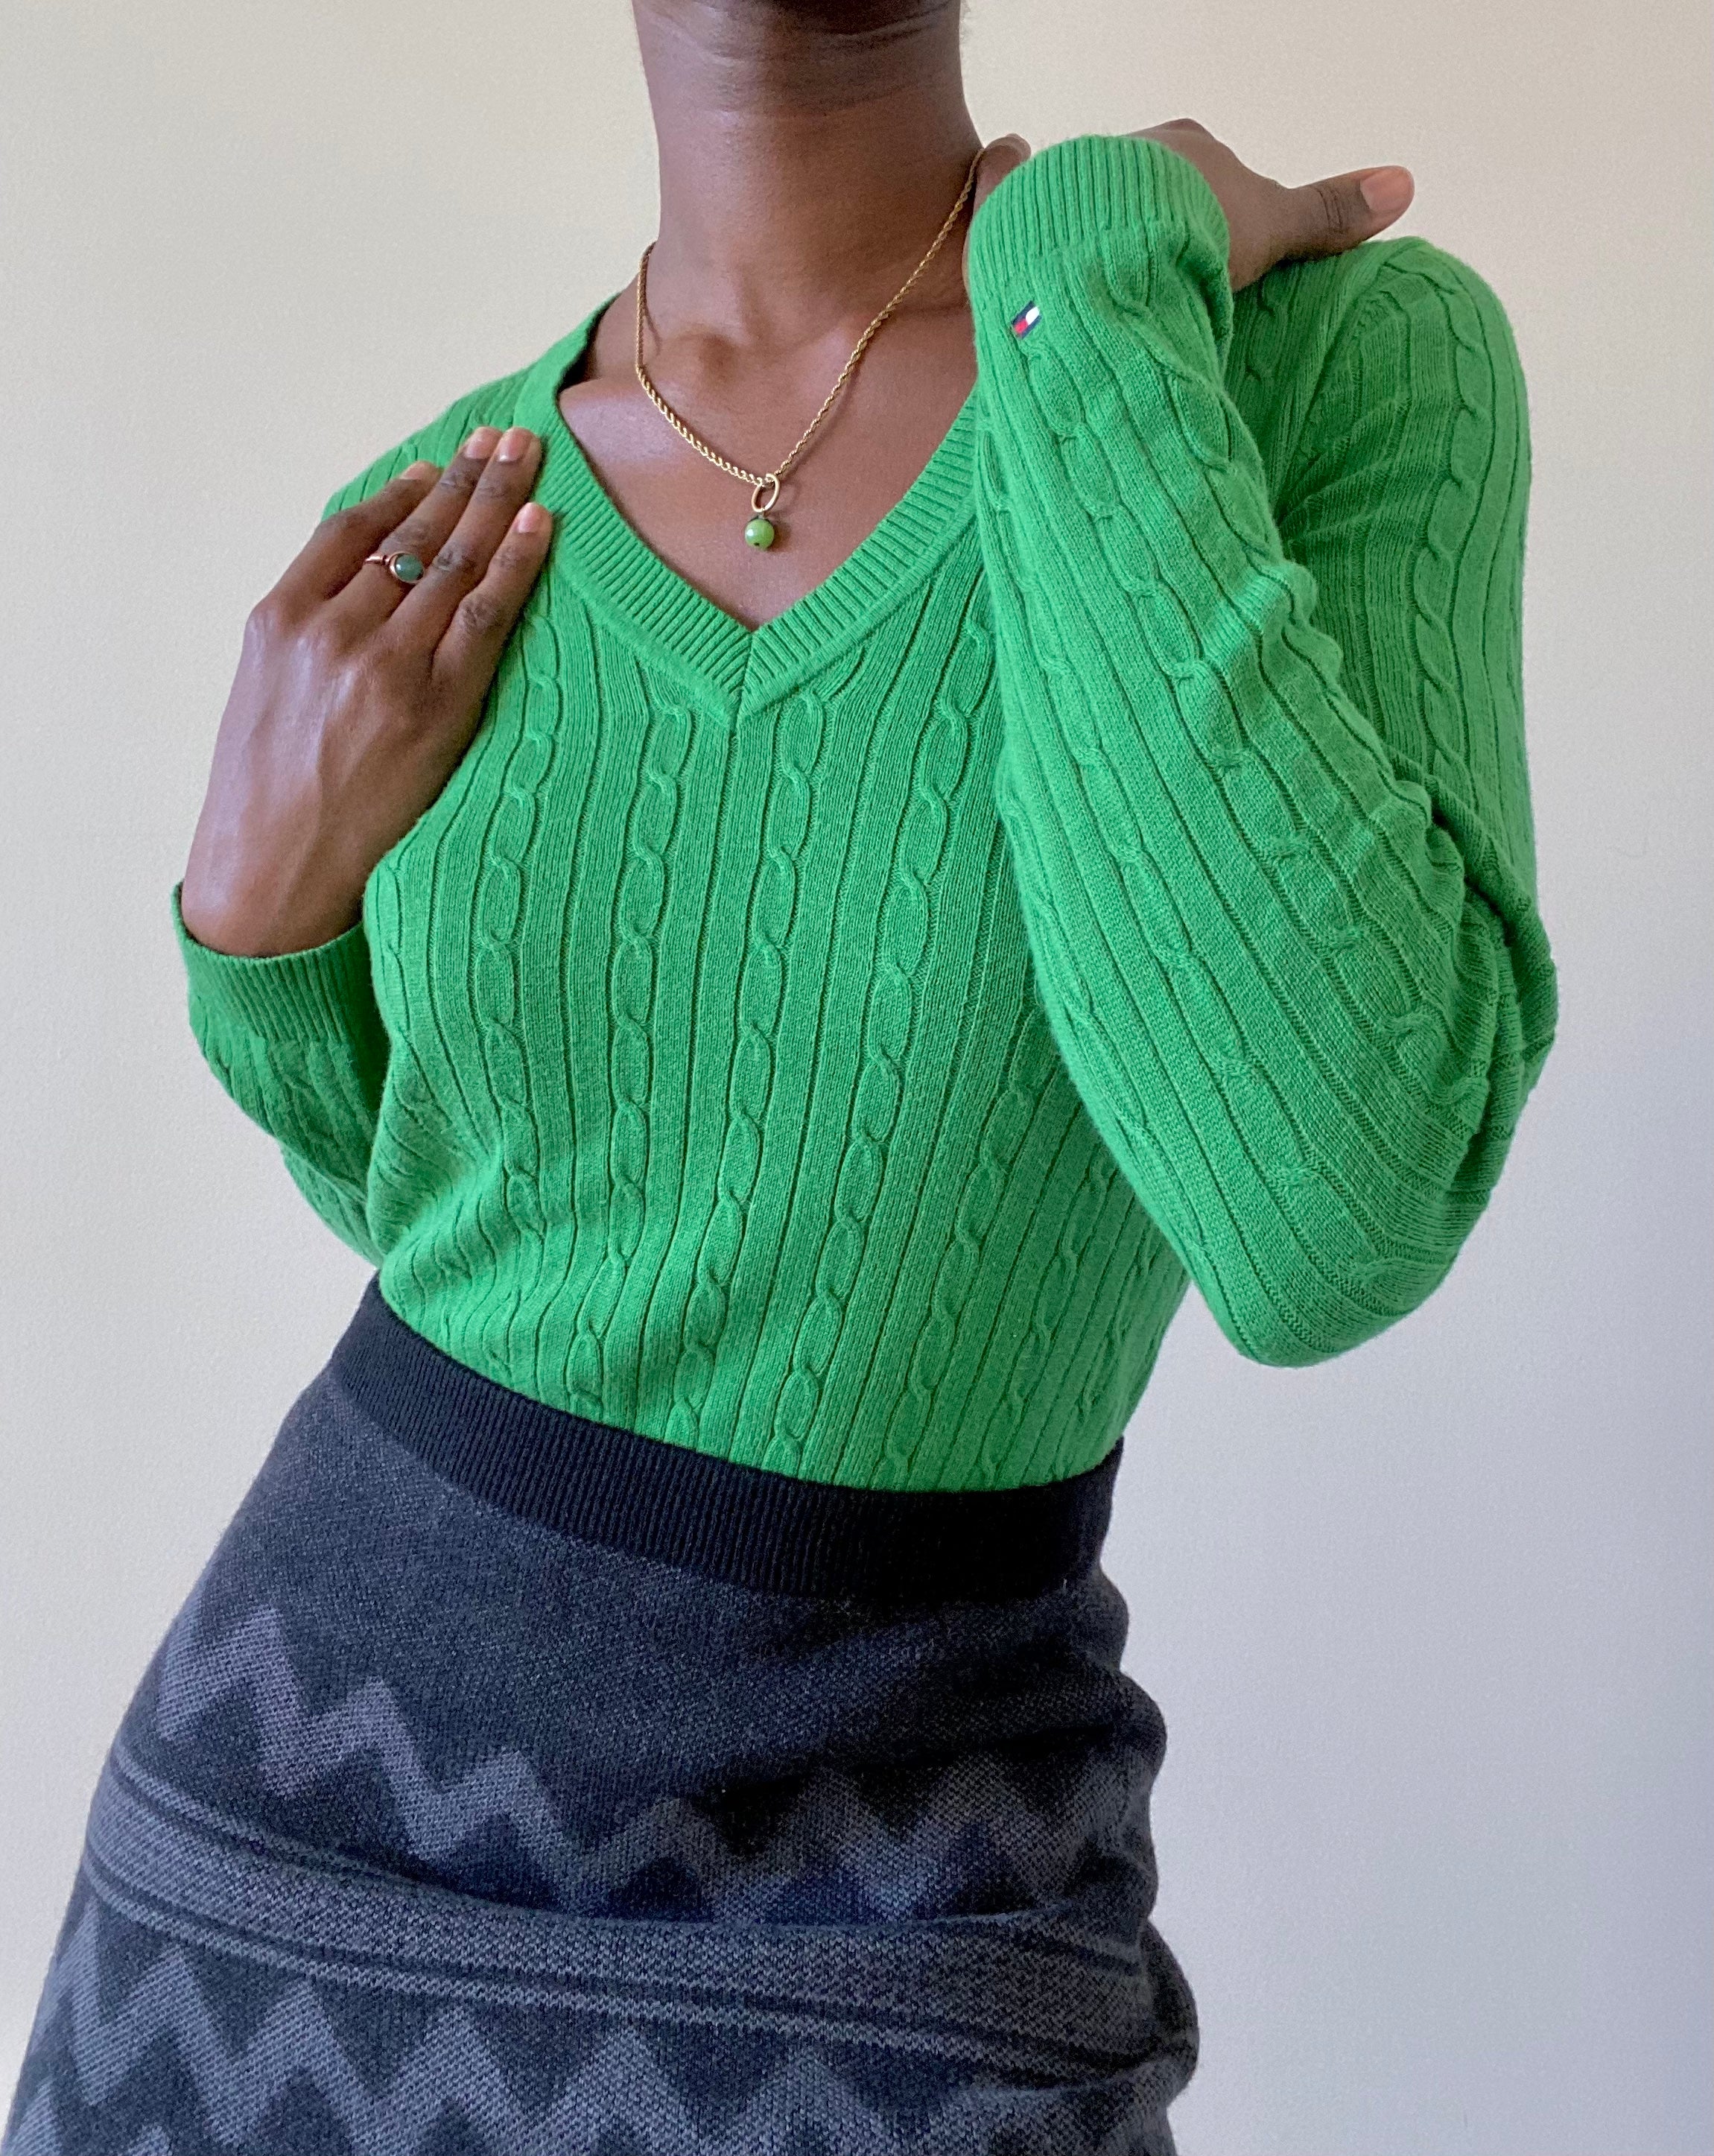 Tommy Hilfiger Green Cable Knit Sweater